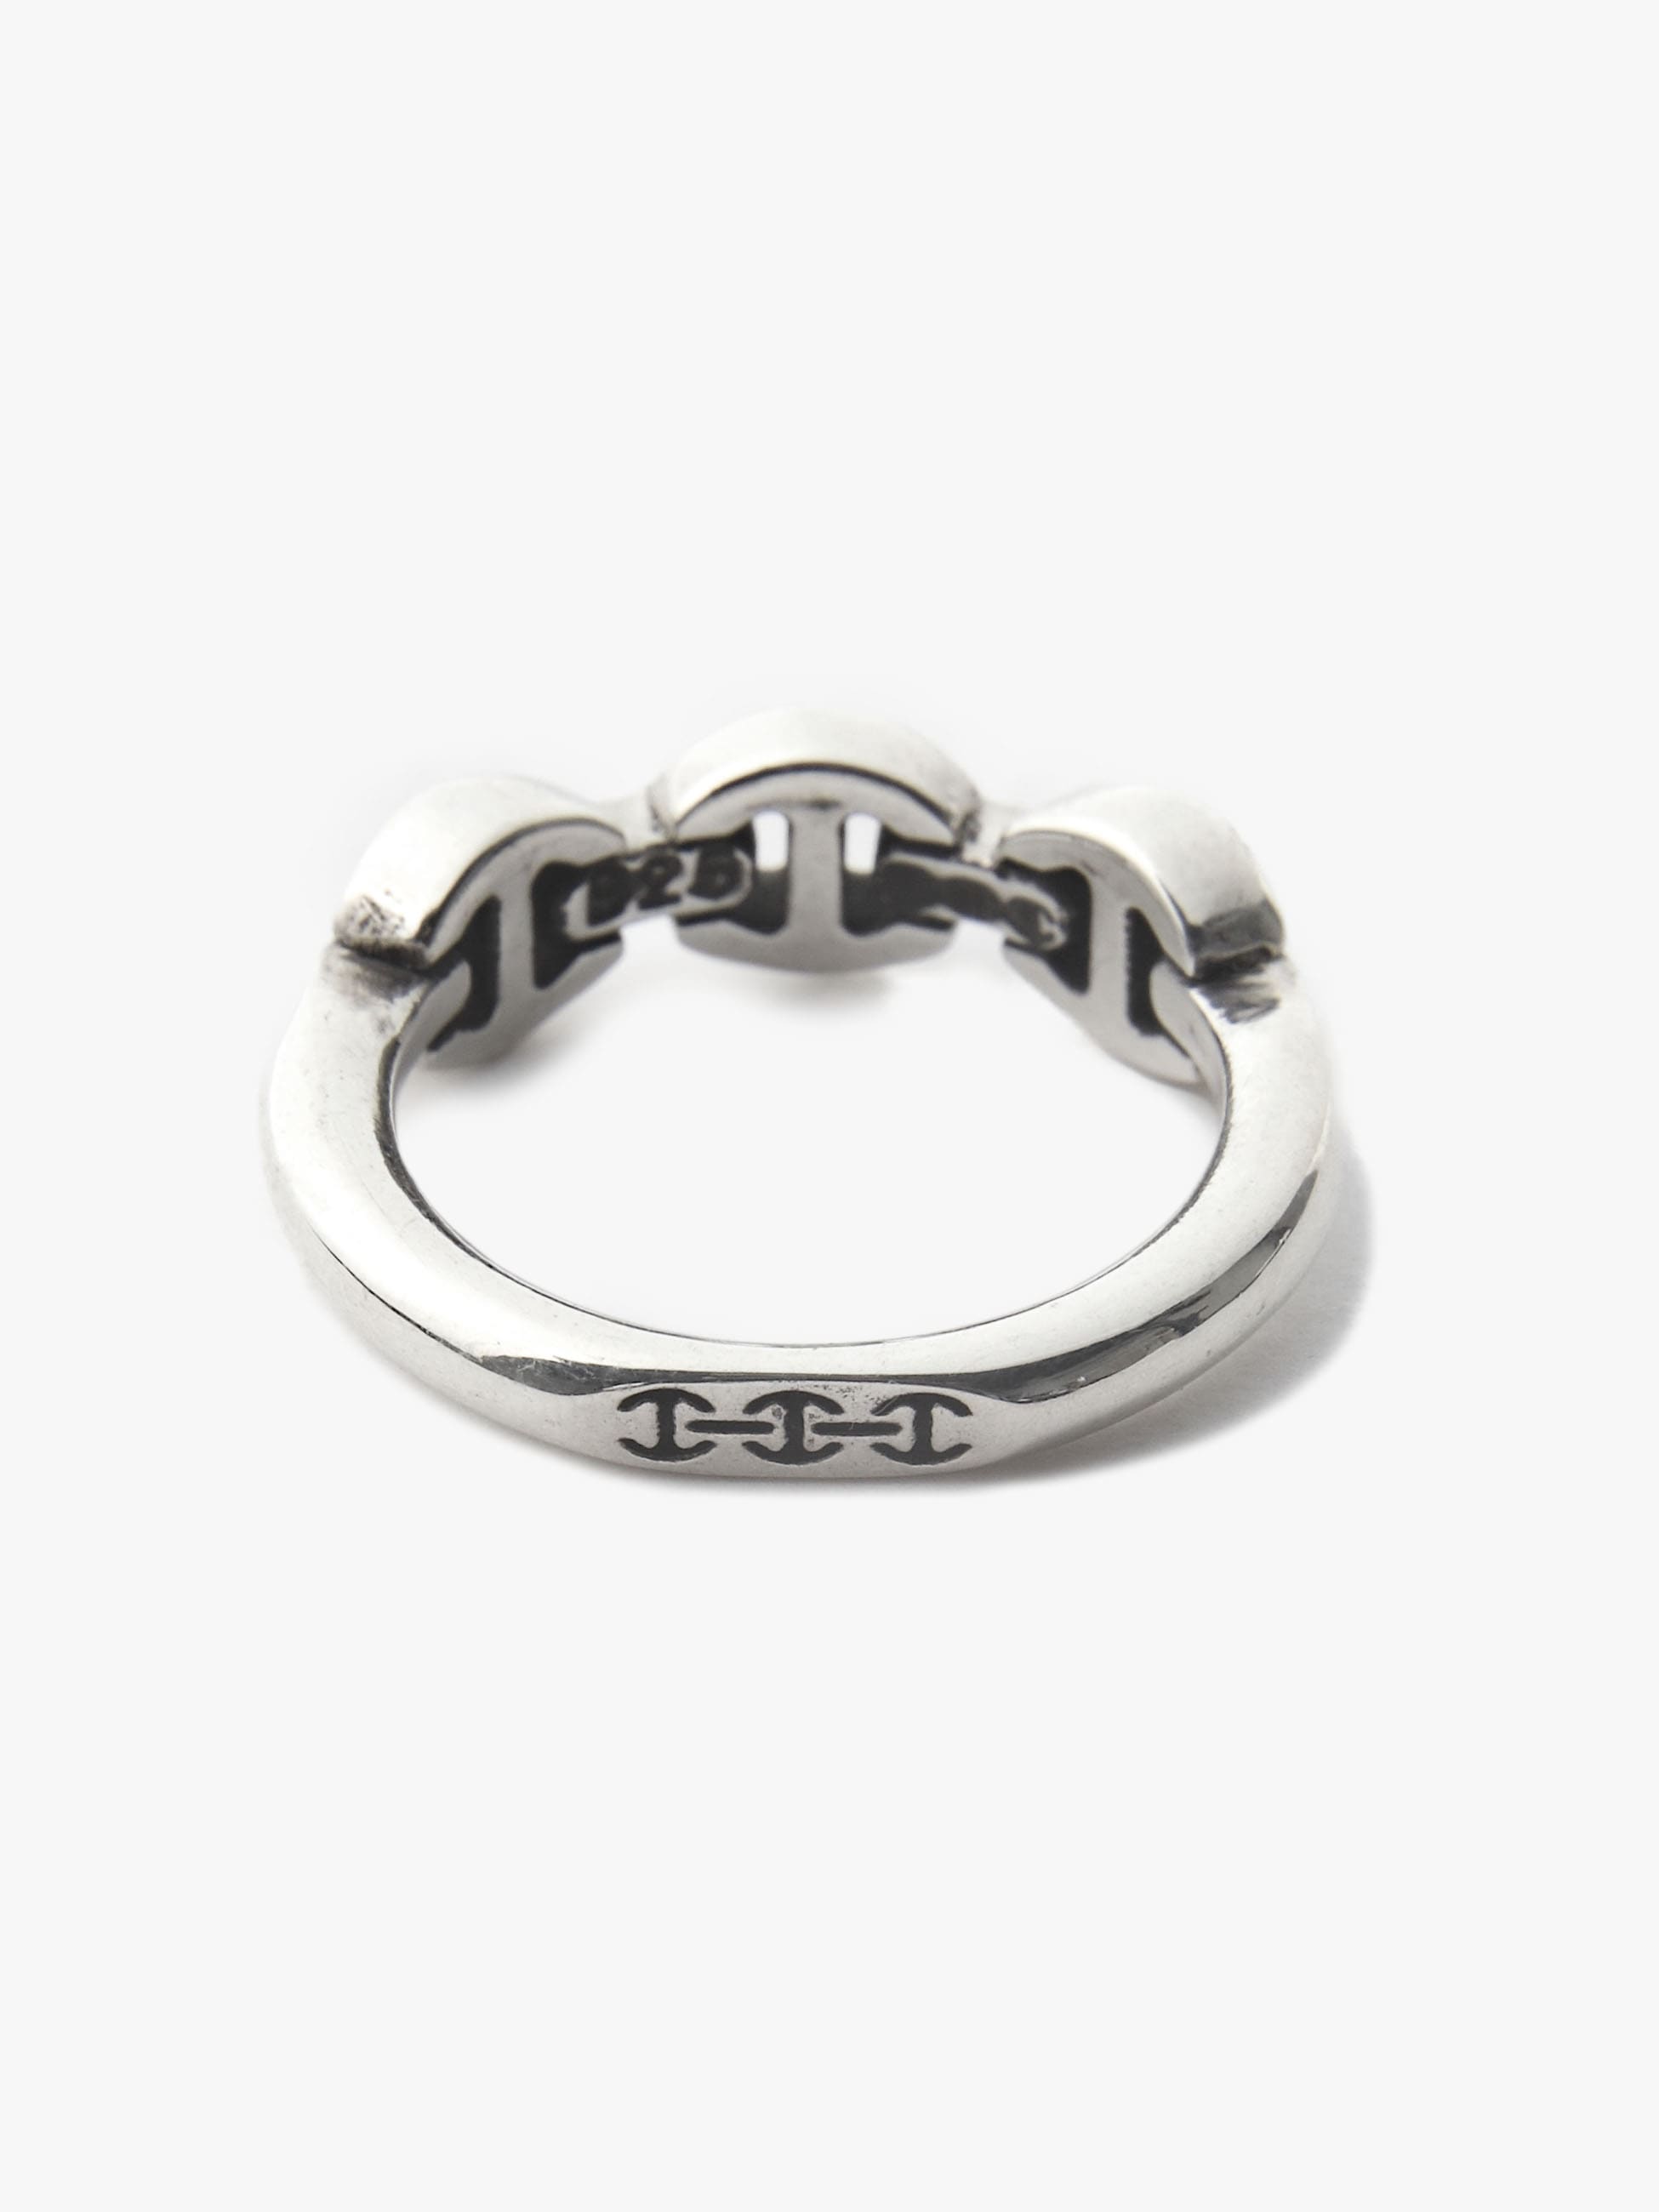 Makers Dame Ring 詳細画像 silver 2